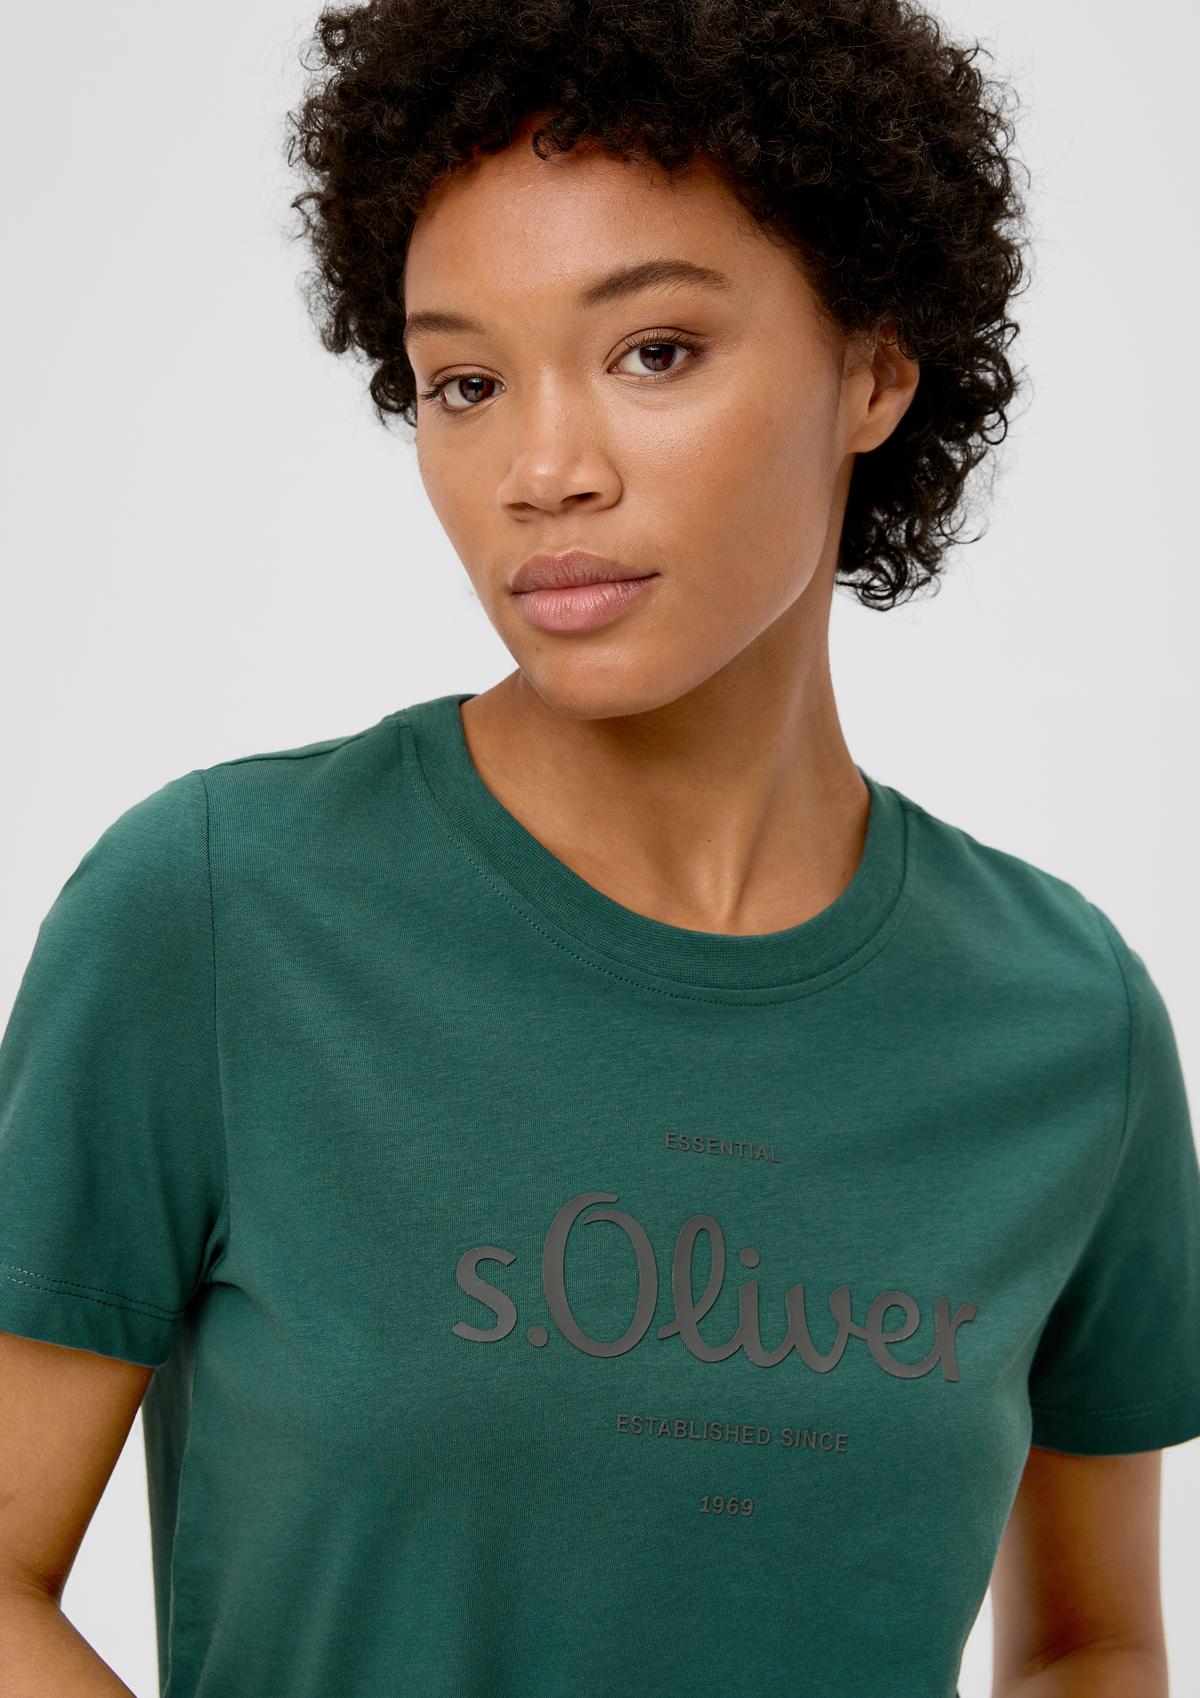 with print - Cotton a green forest logo top